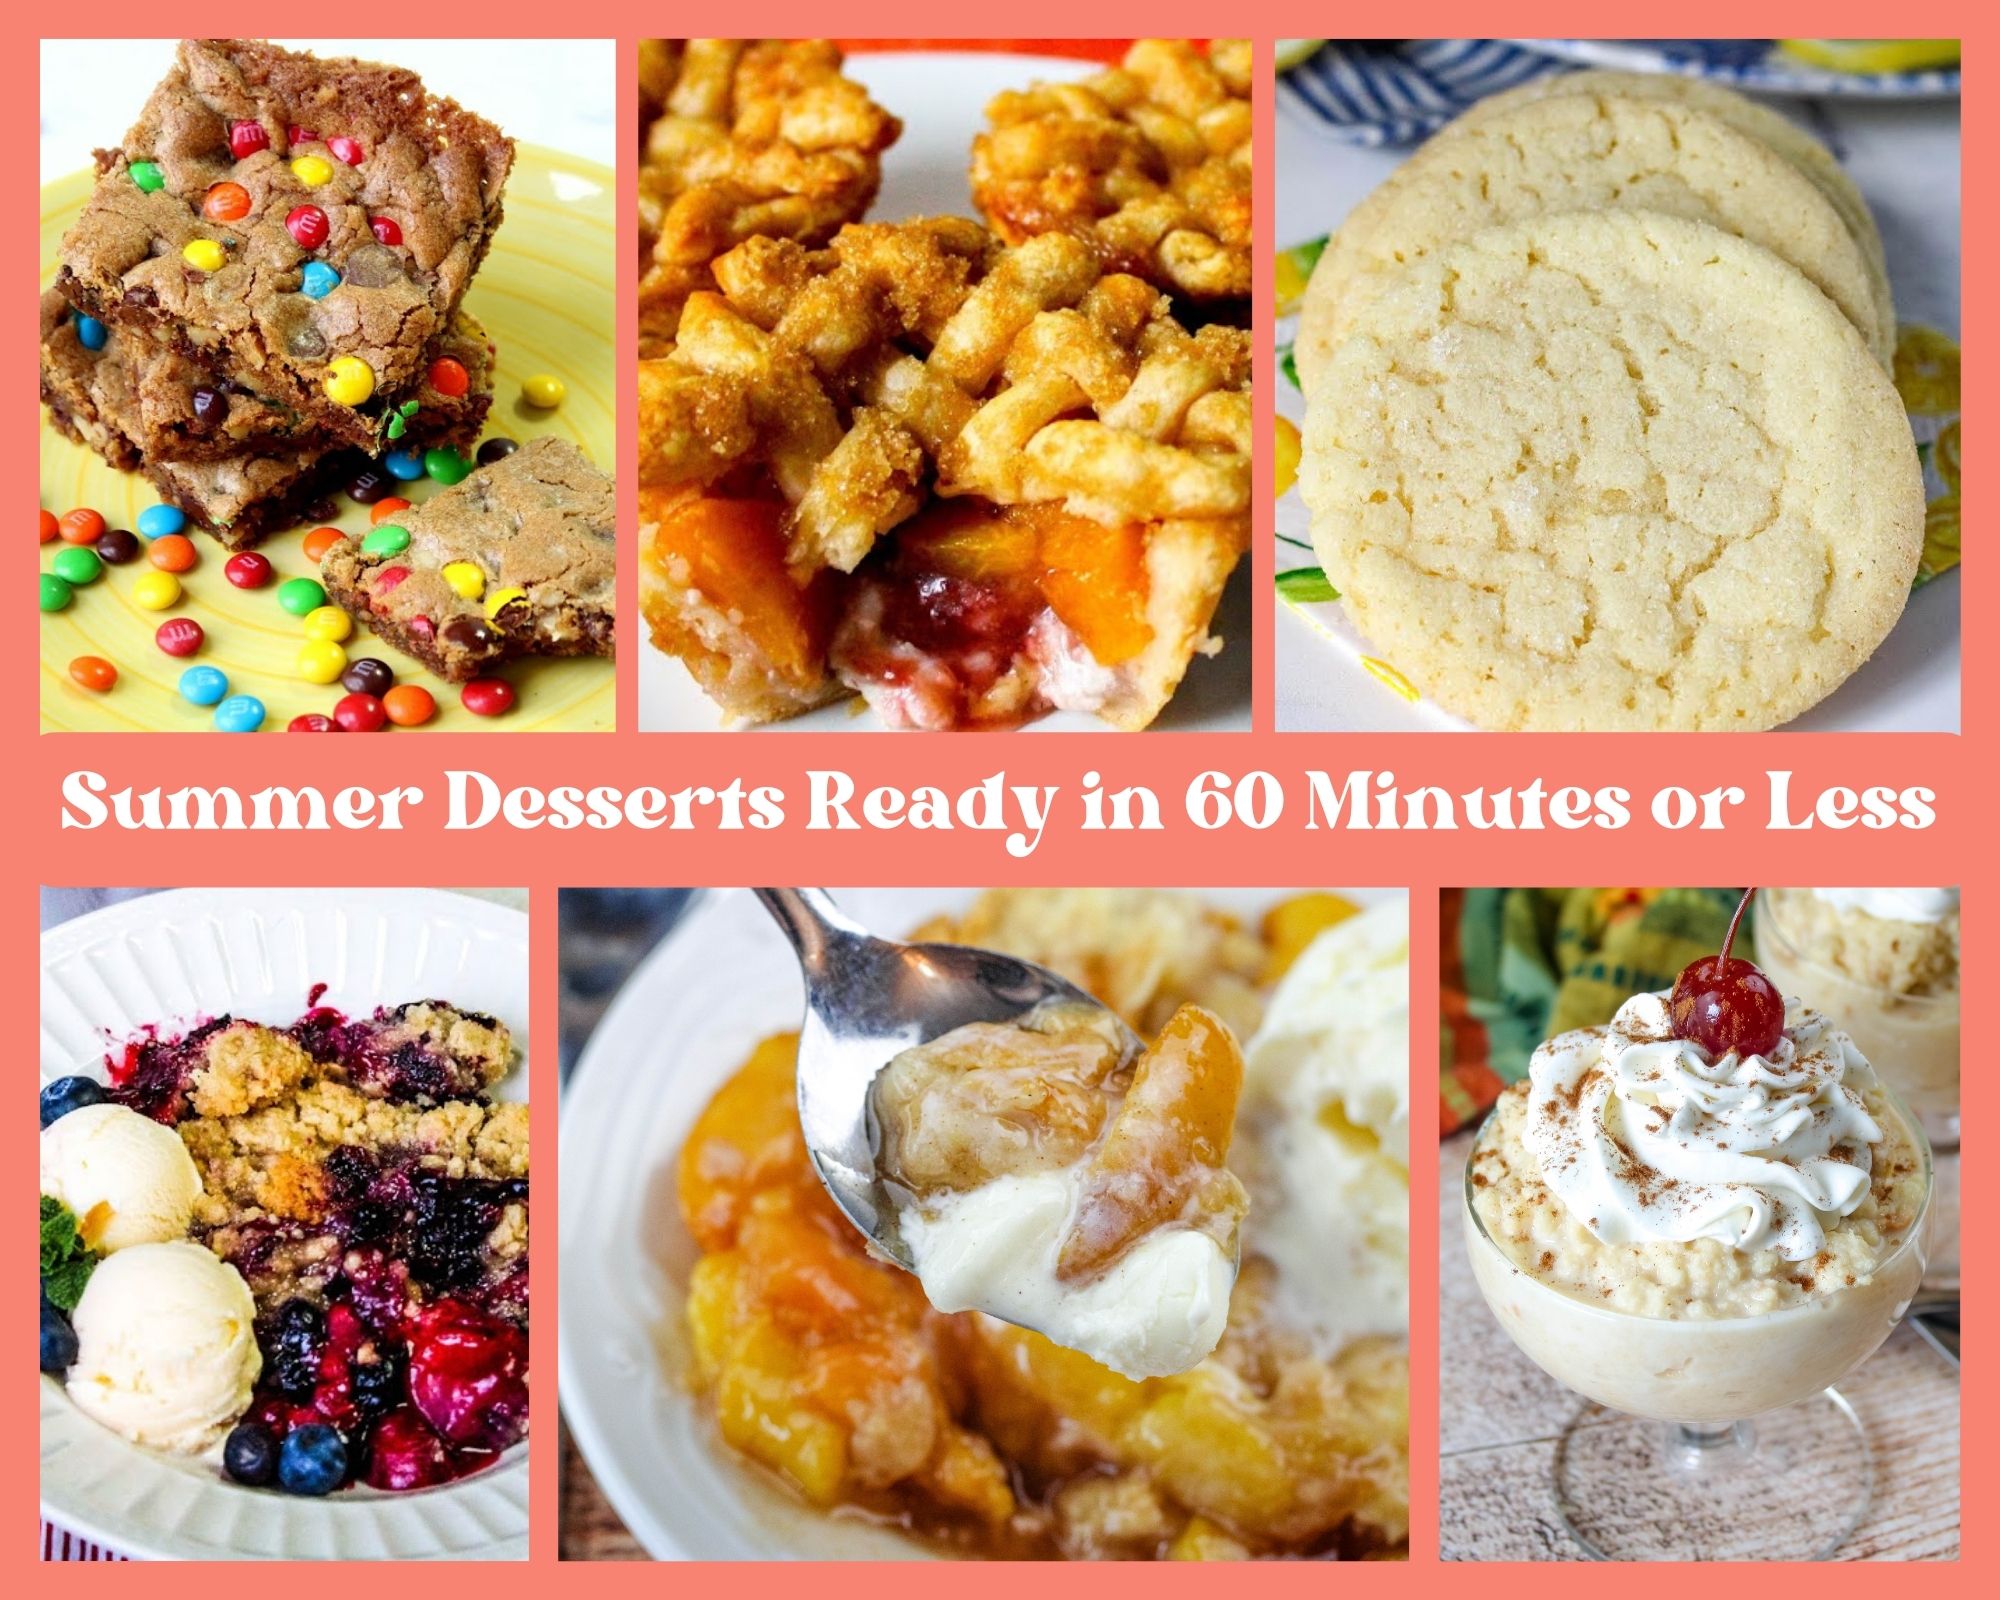 Summer Desserts Ready in 60 Minutes or Less